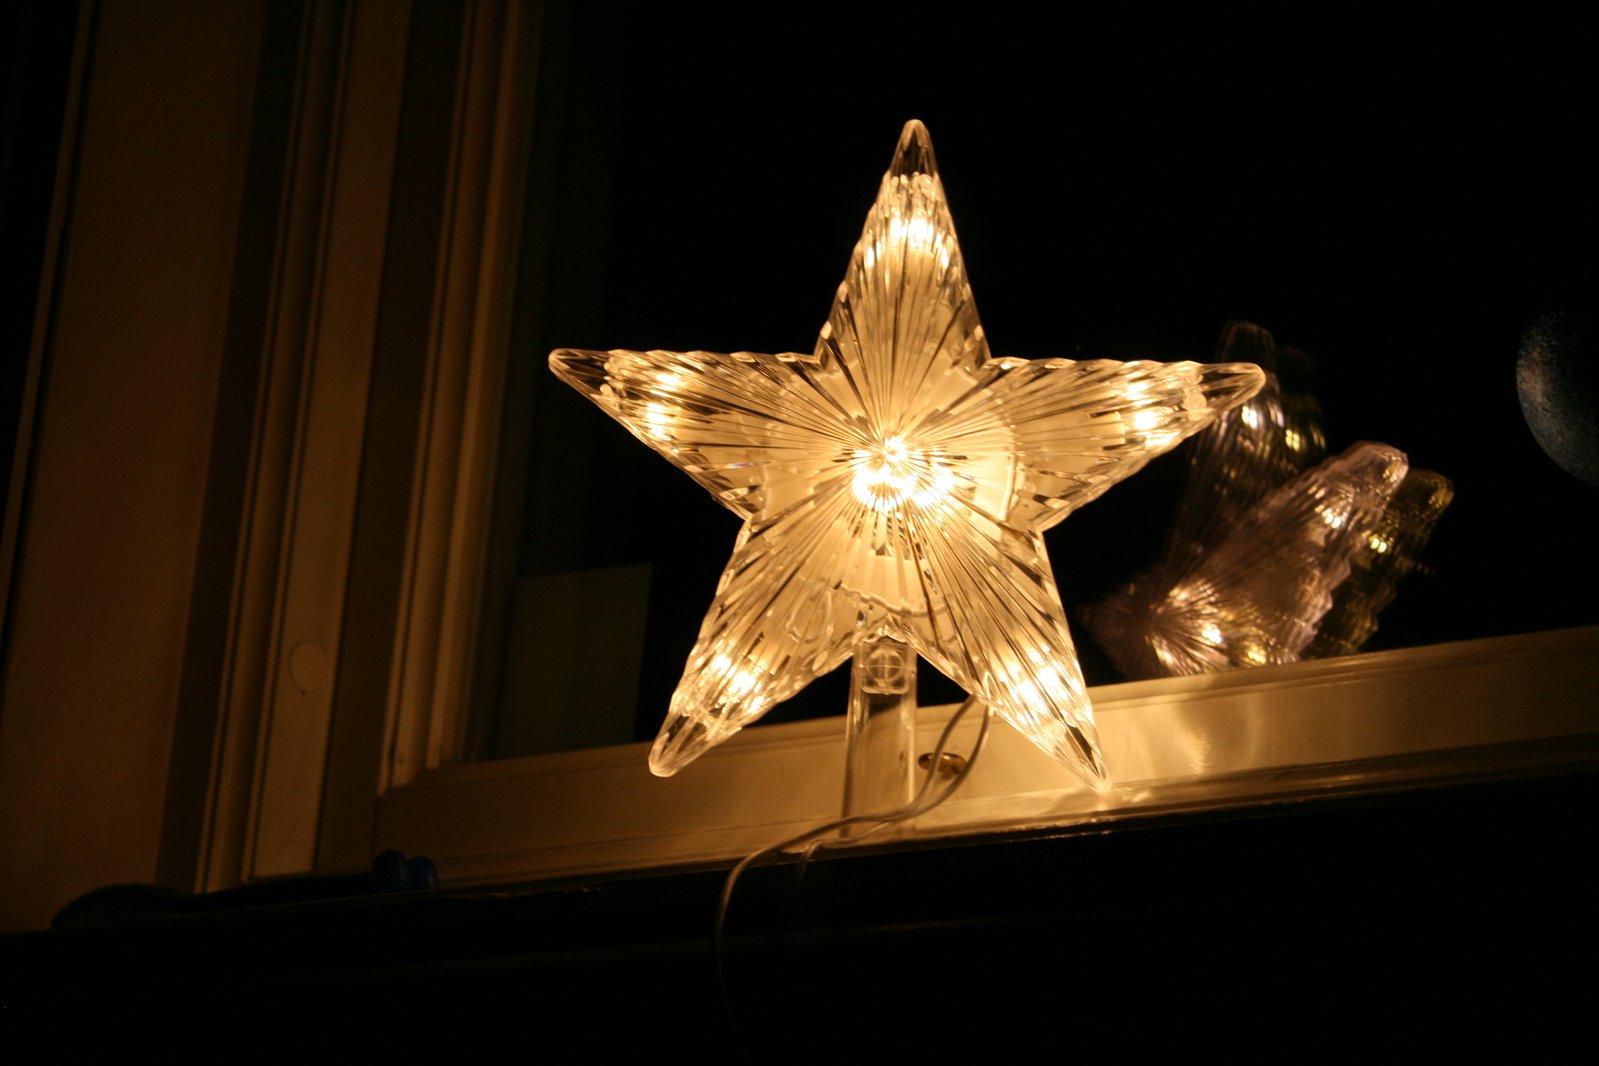 a lighted glass star on the window sill